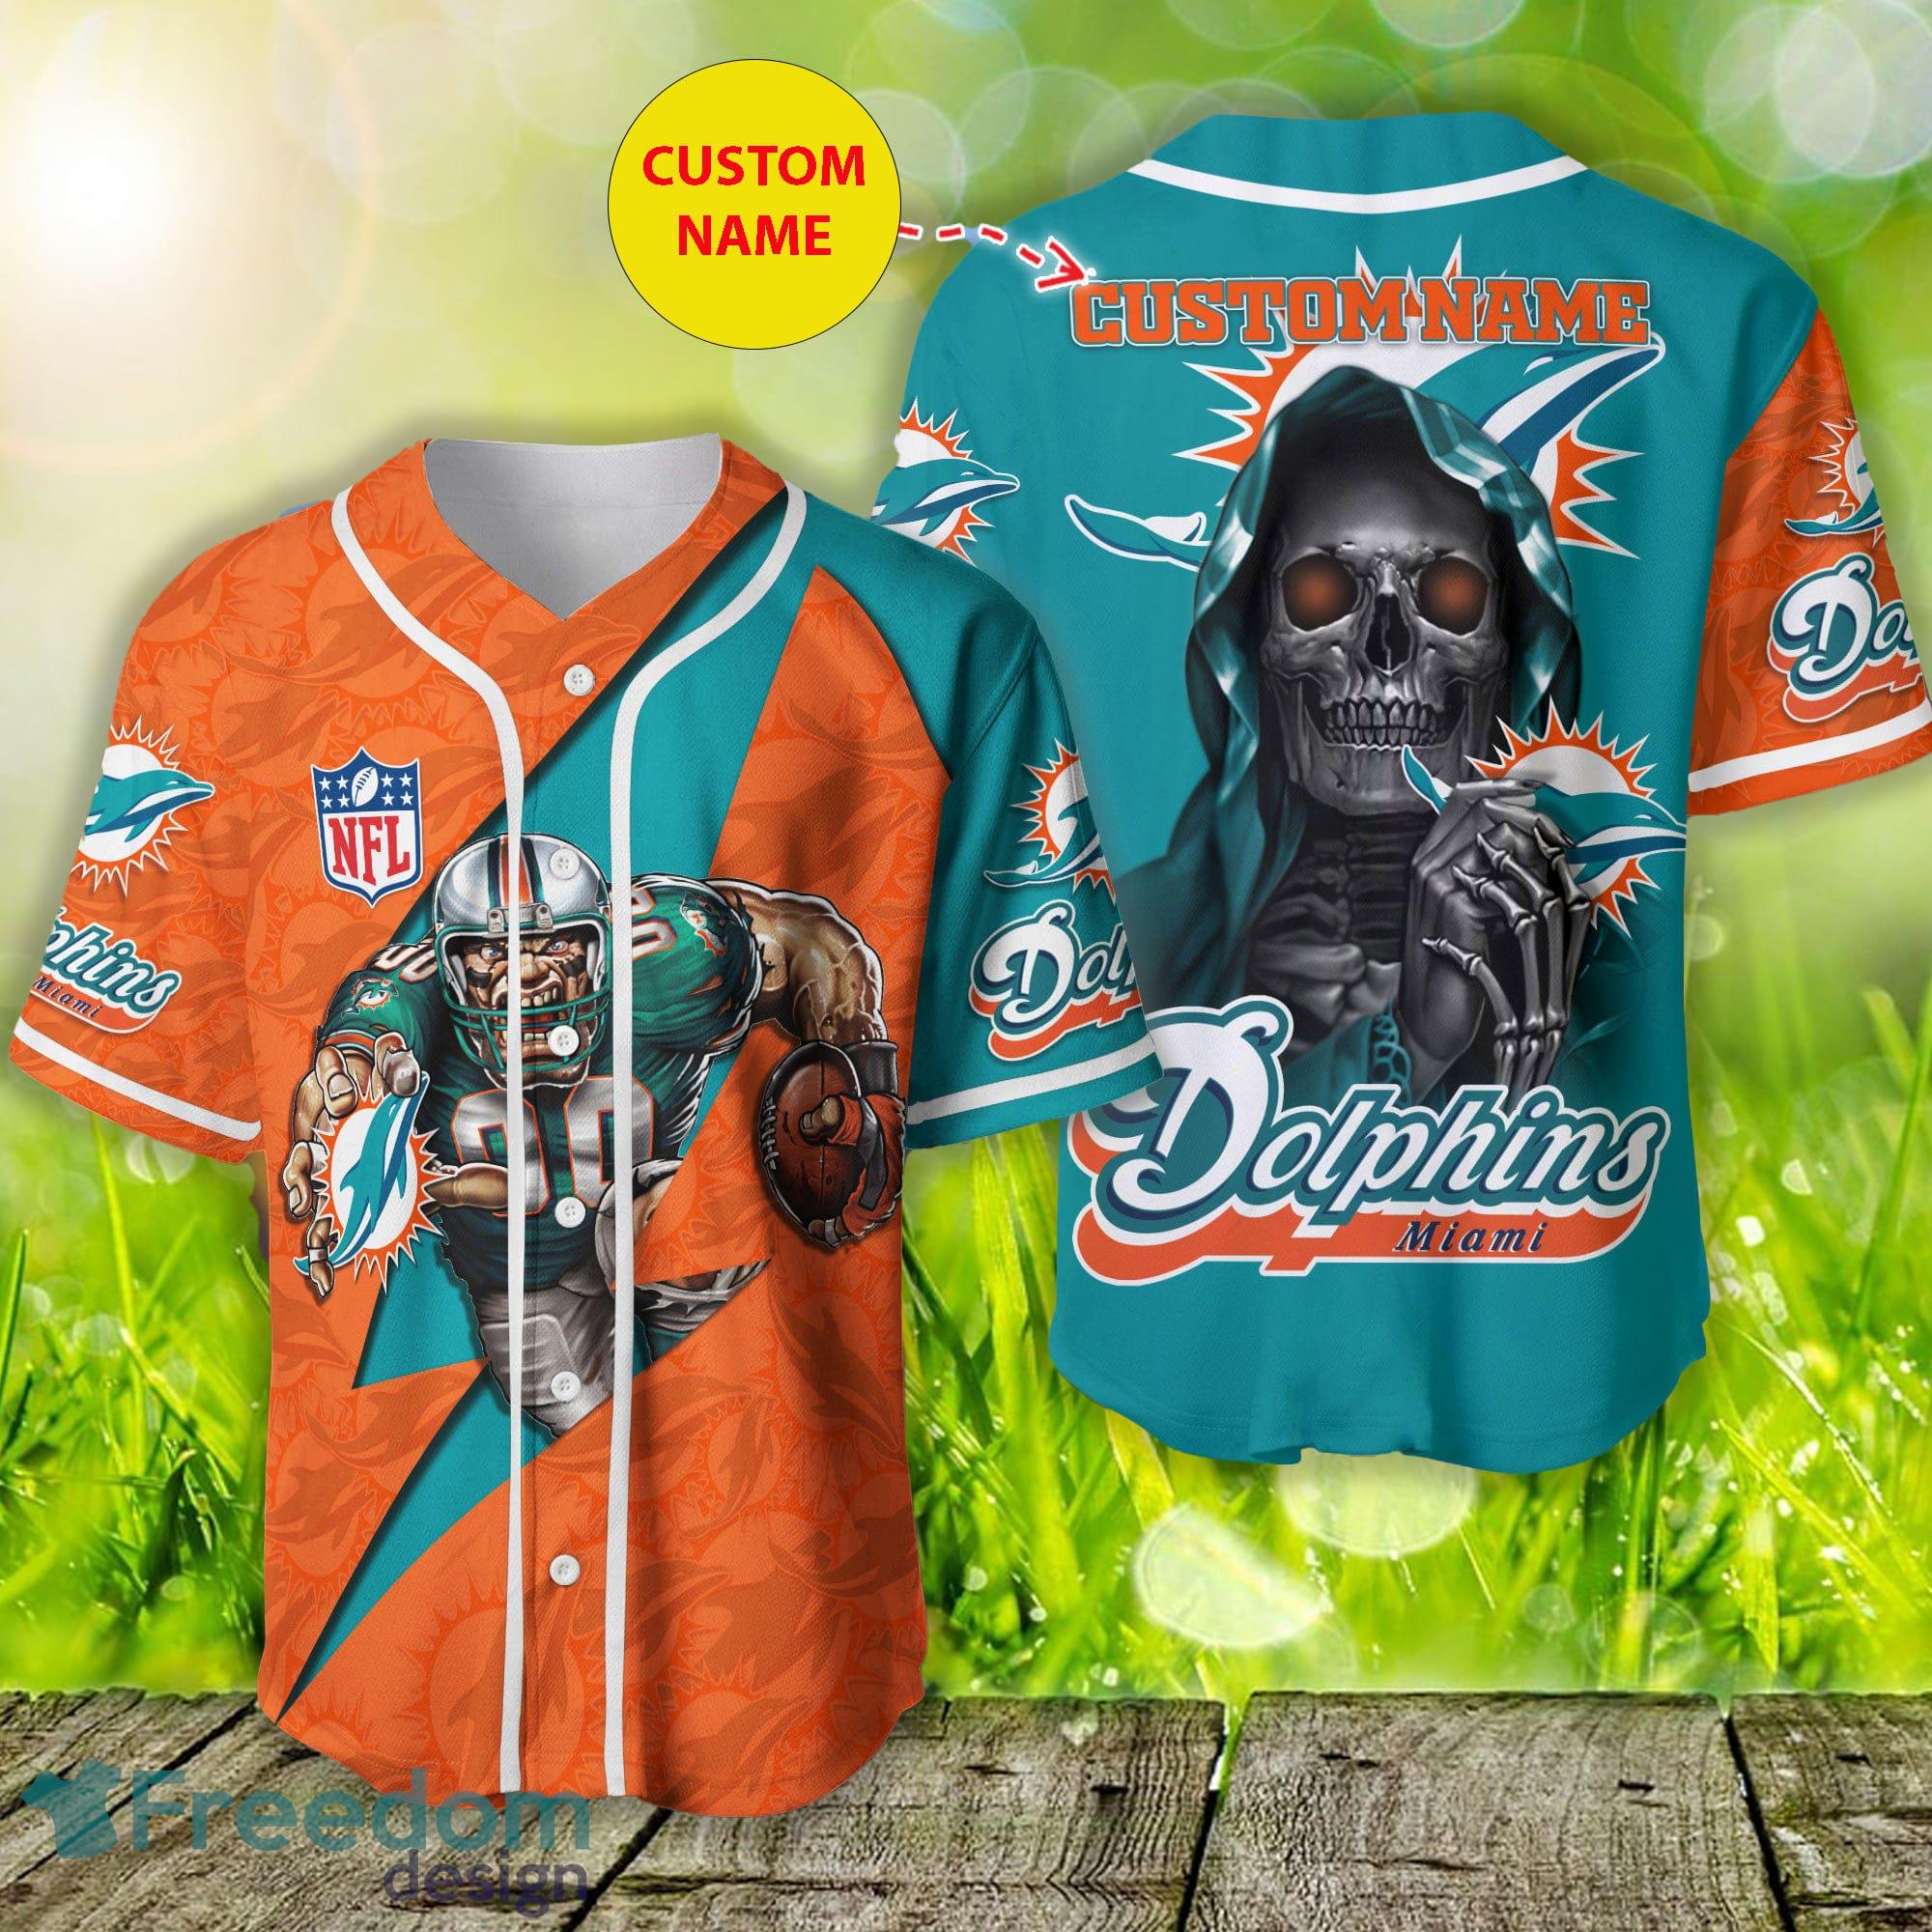 NFL Miami Dolphins Baseball Jersey 3D Personalized Skull Score Big